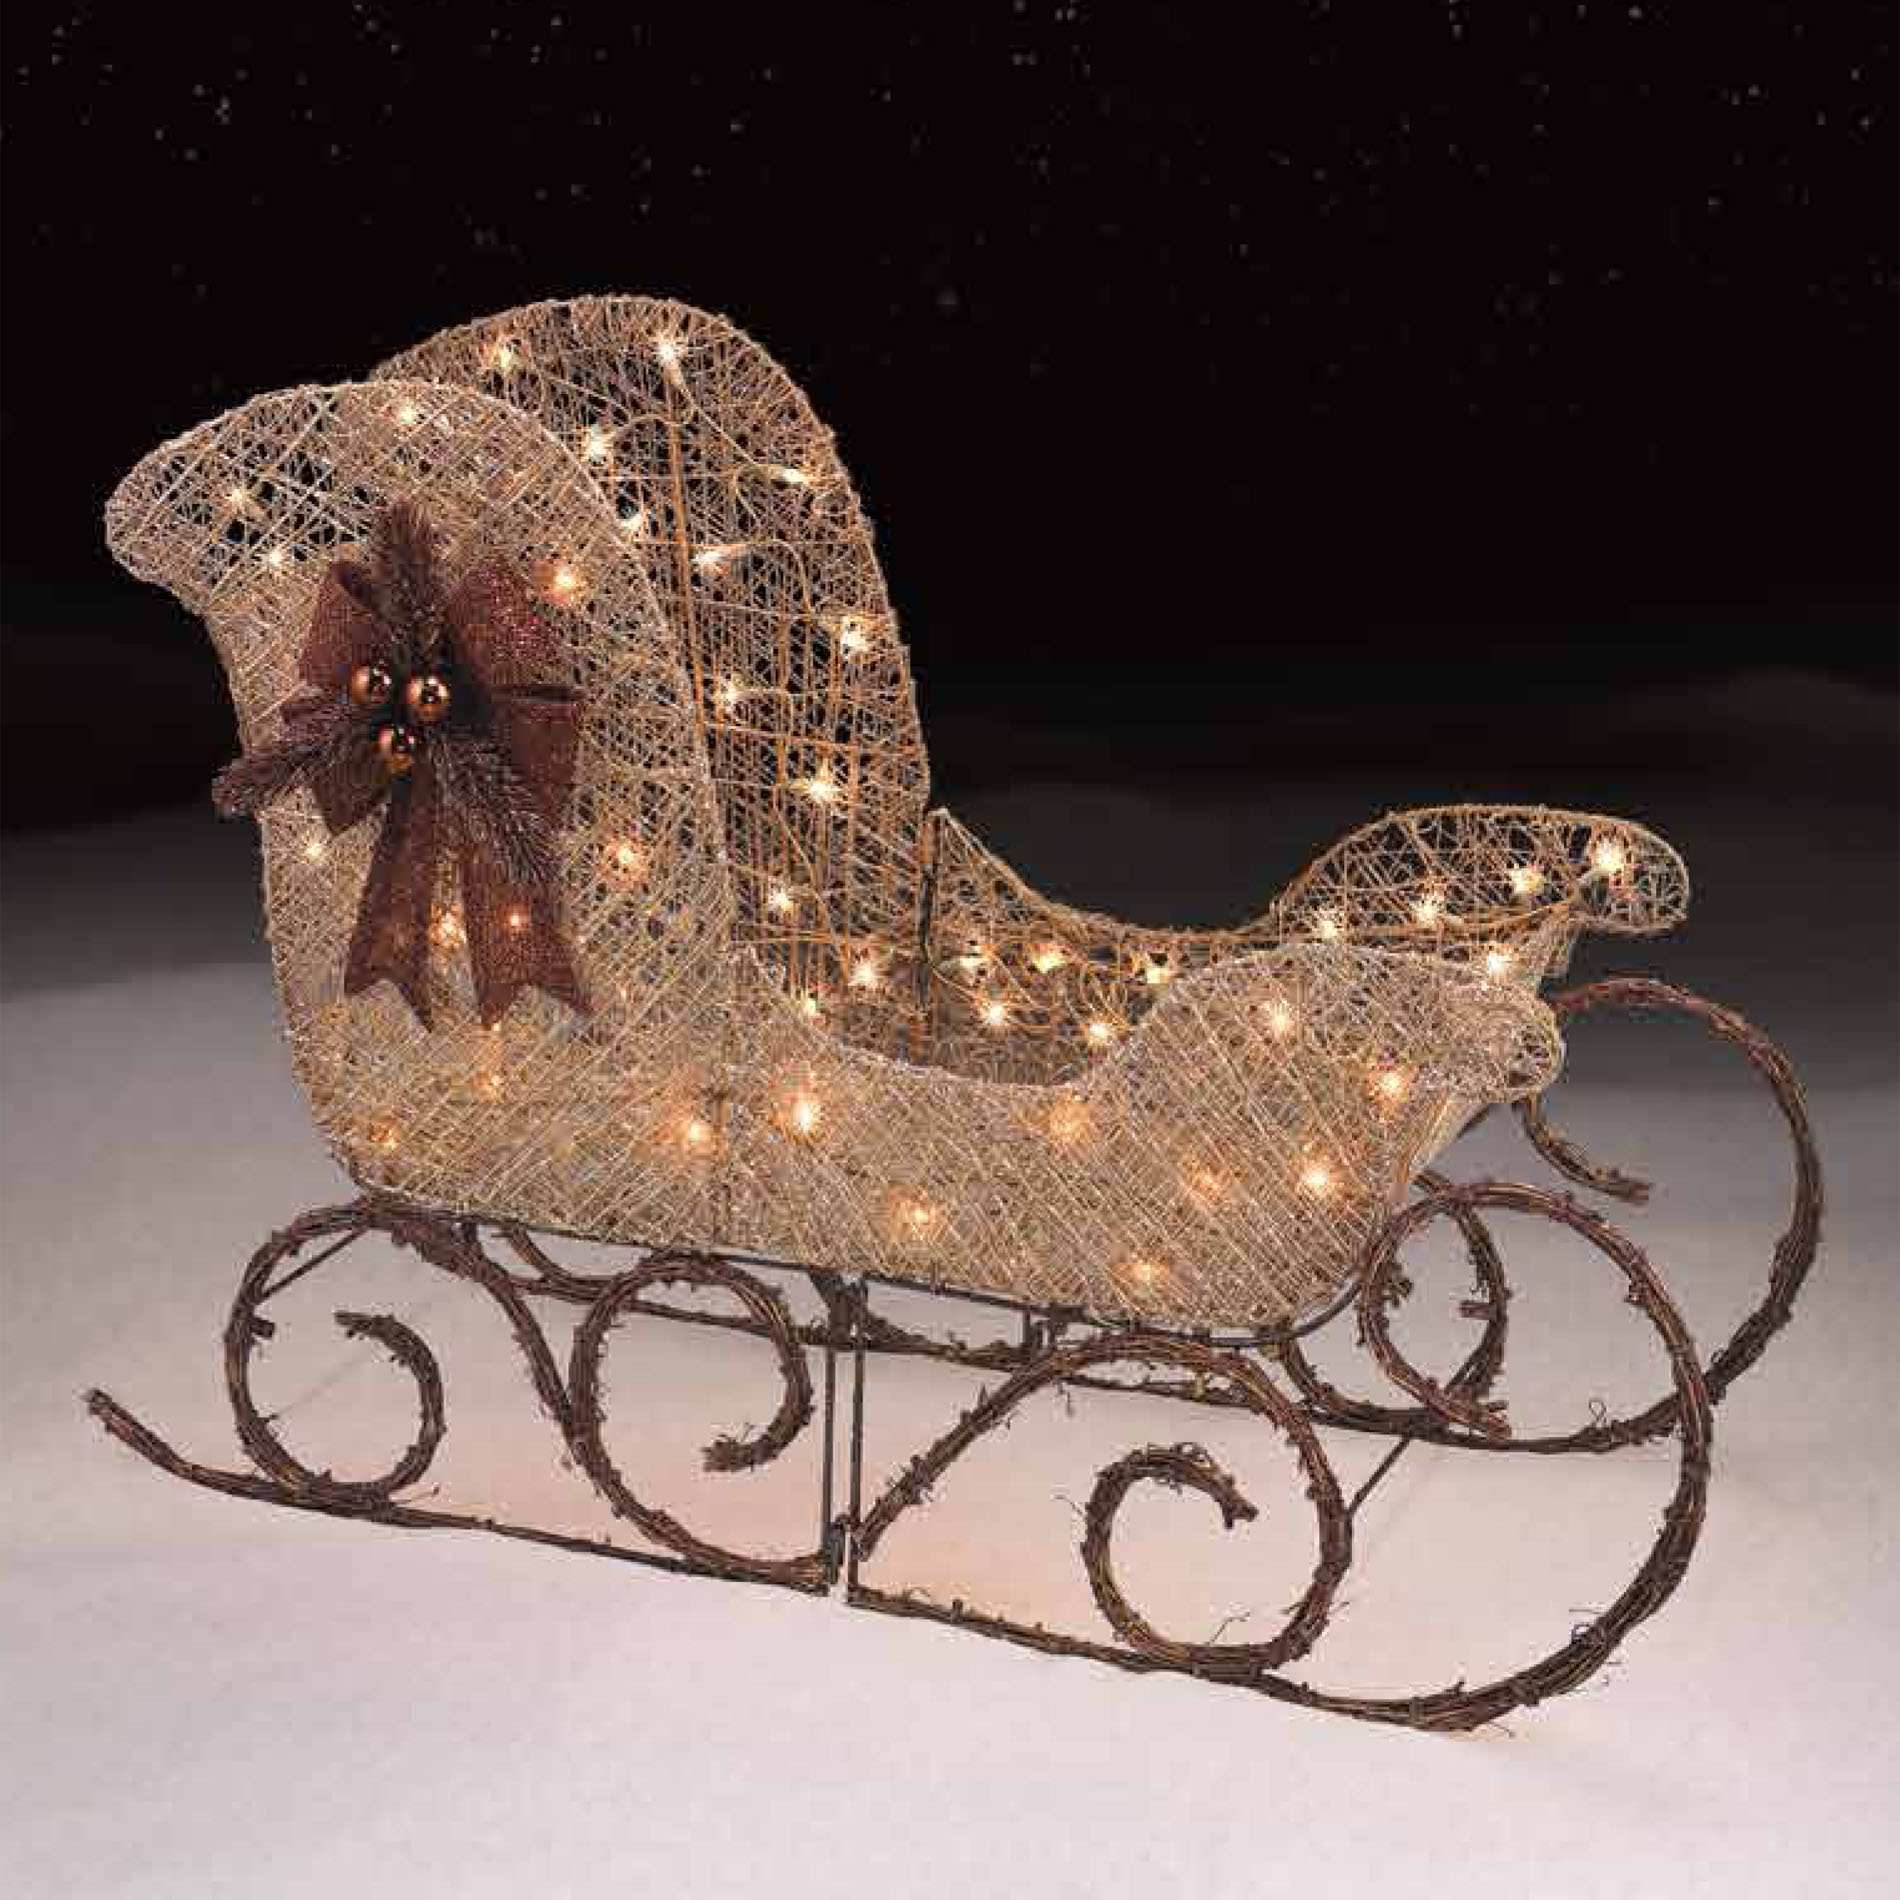 36" Outdoor Light-Up Gold Santa Sleigh Christmas Decoration Outside